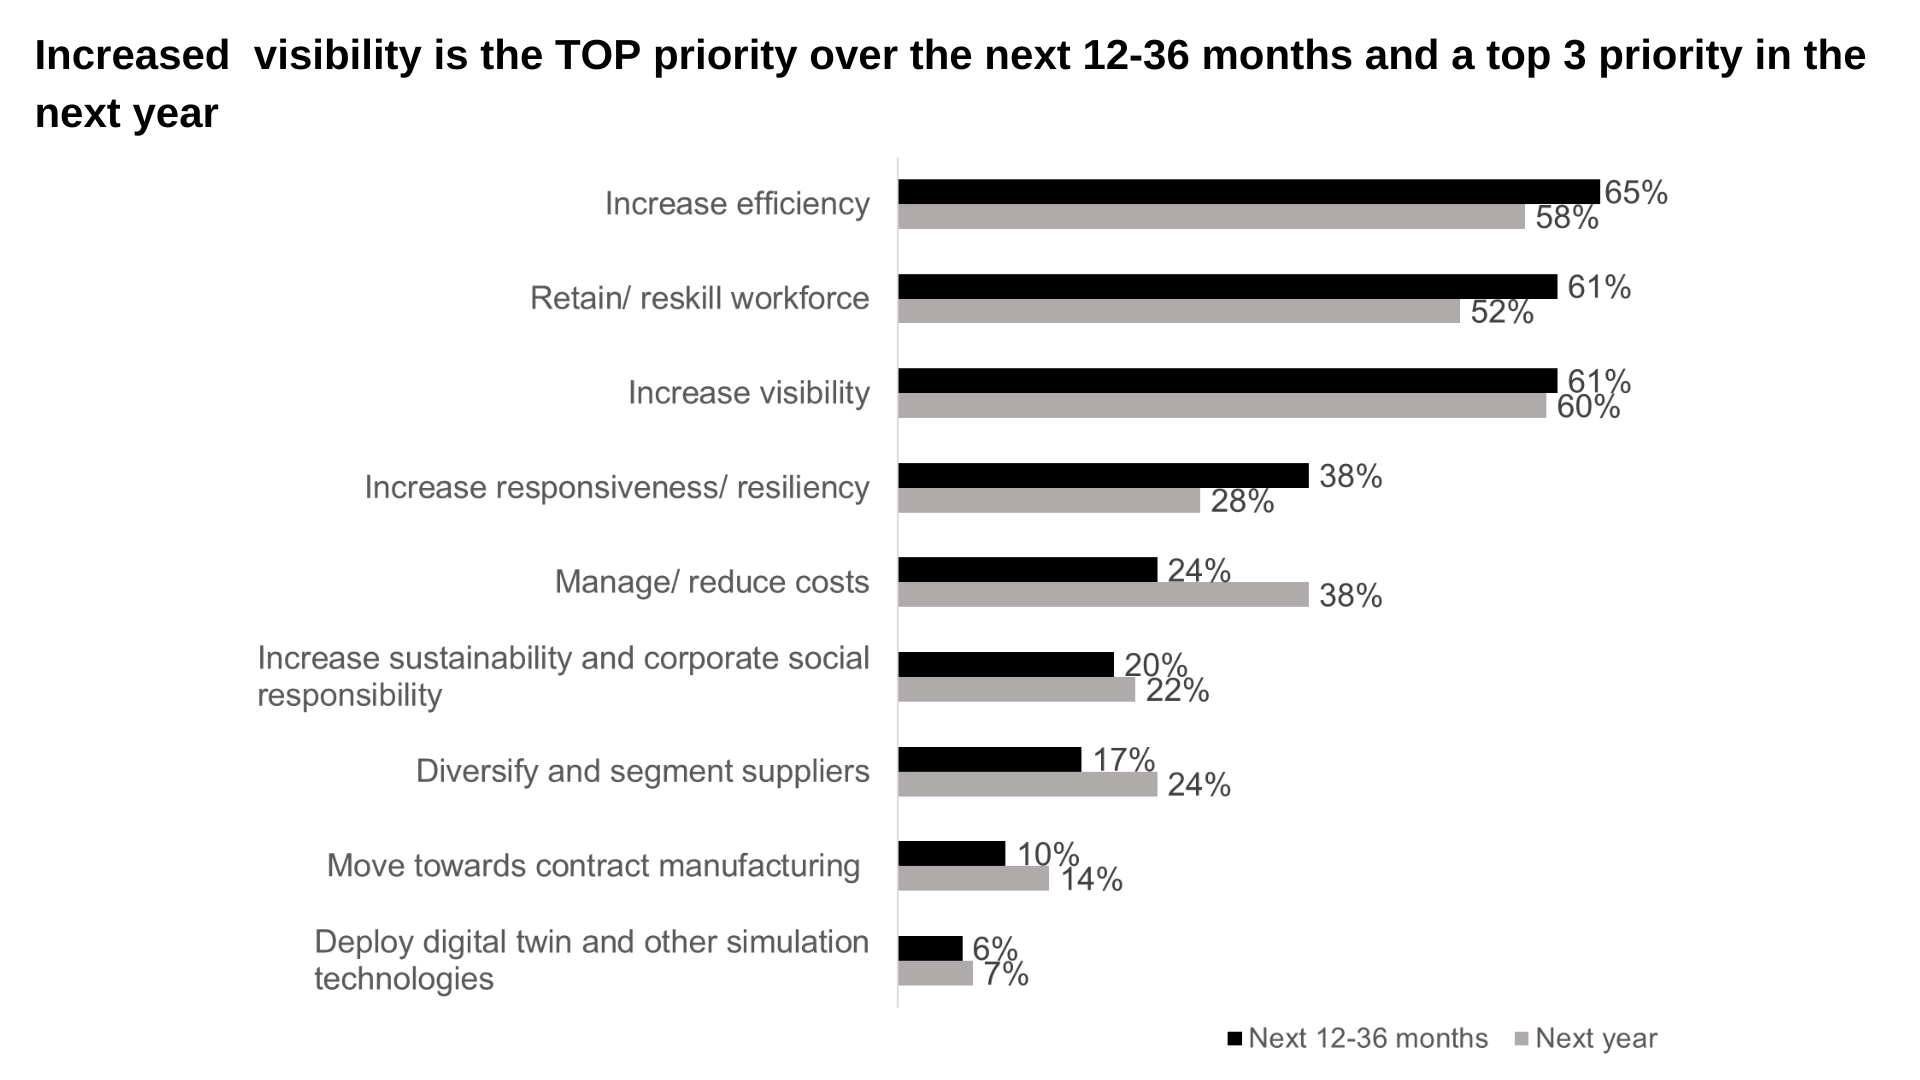 According to Ernst & Young’s survey, visibility and efficiency are the top concerns for the next year.